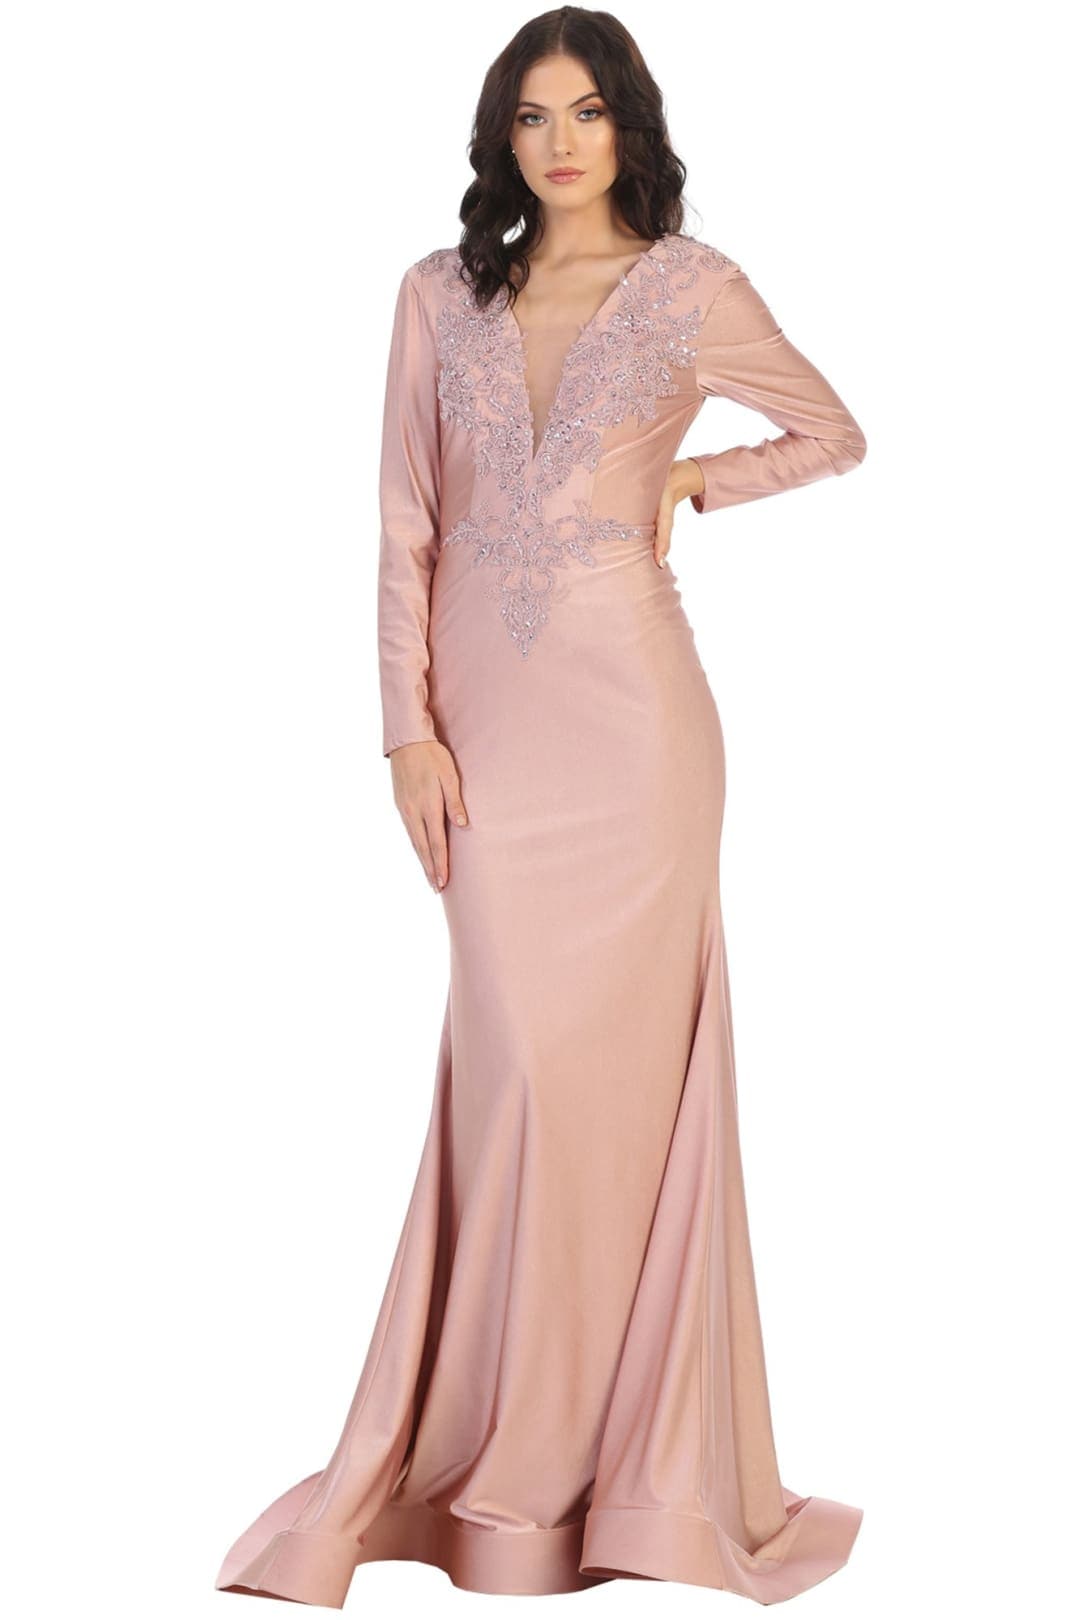 EVENING GOWN LONG SLEEVE & PLUS SIZE - Dusty Rose / 6 - Evening Gown